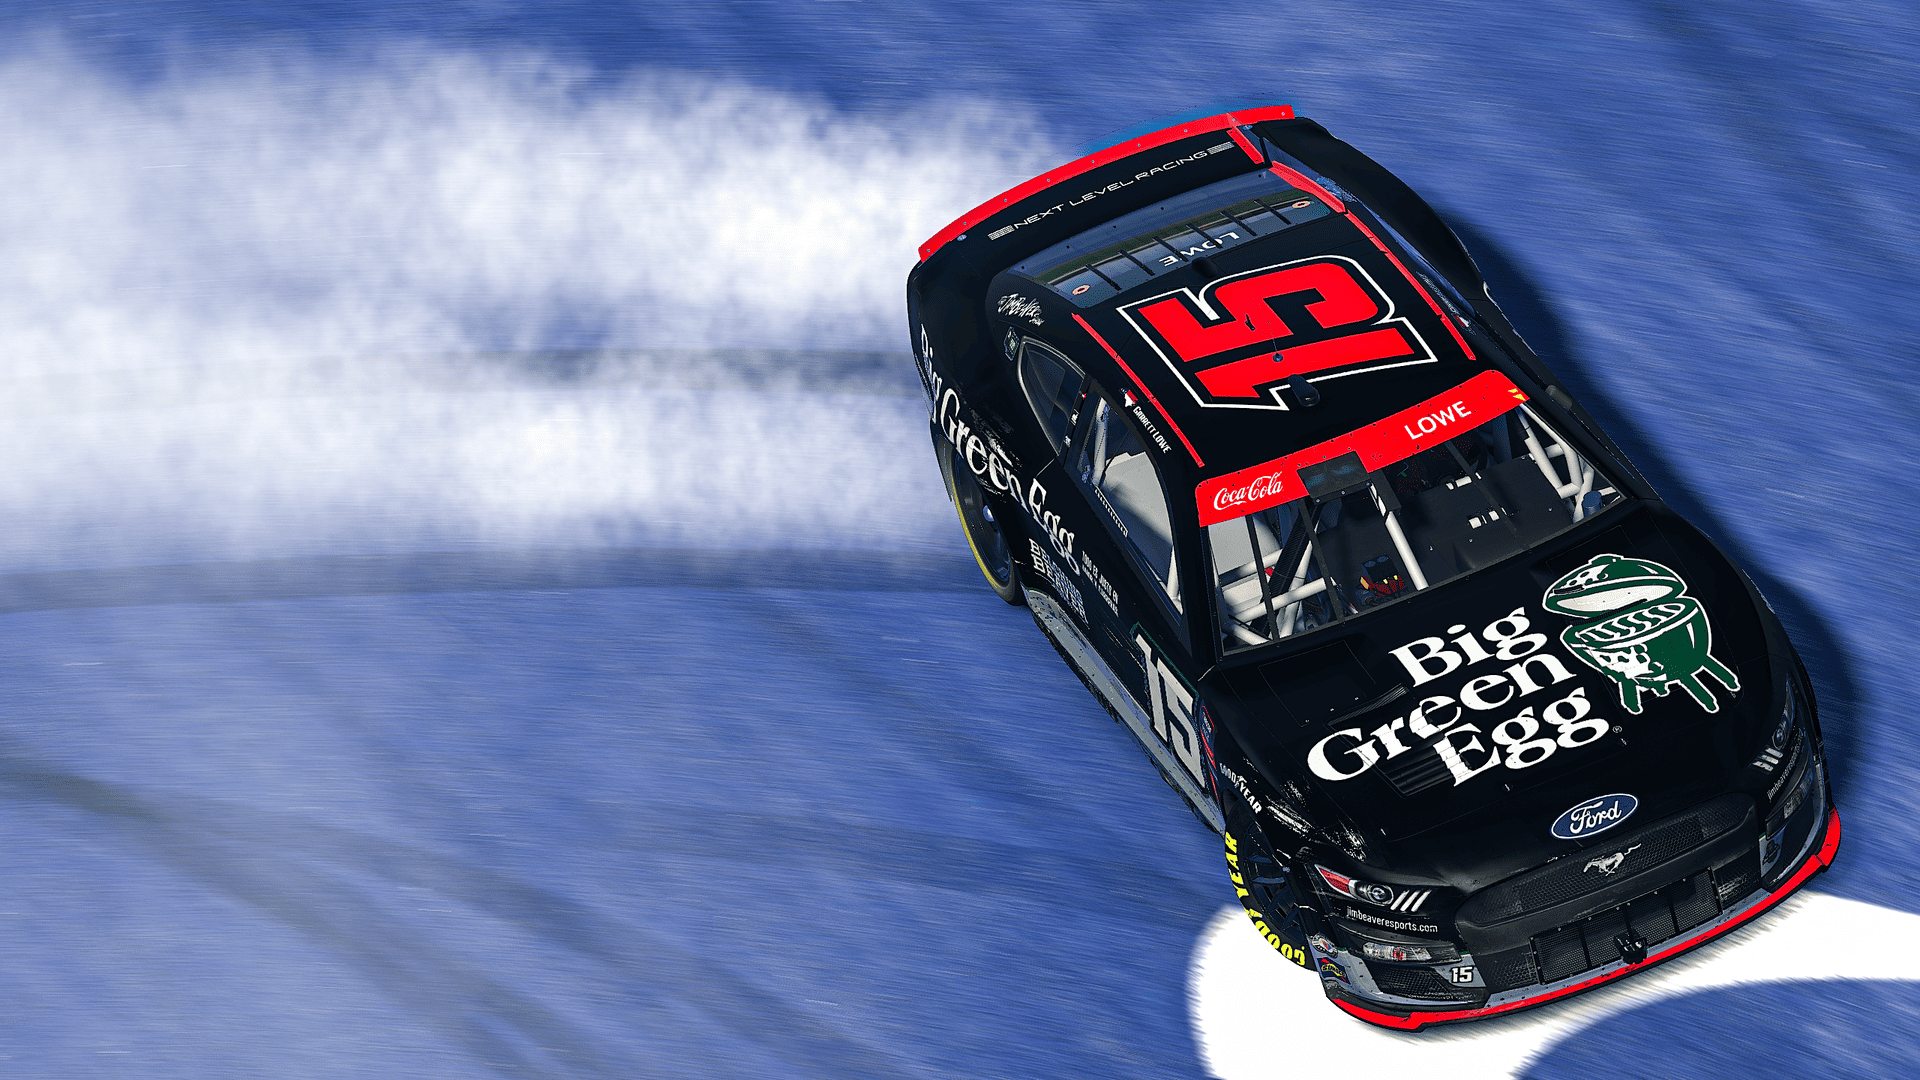 Garrett Lowe embraced his inner intimidator and clinched an eNASCAR Championship 4 berth with a win at Michigan International Speedway.